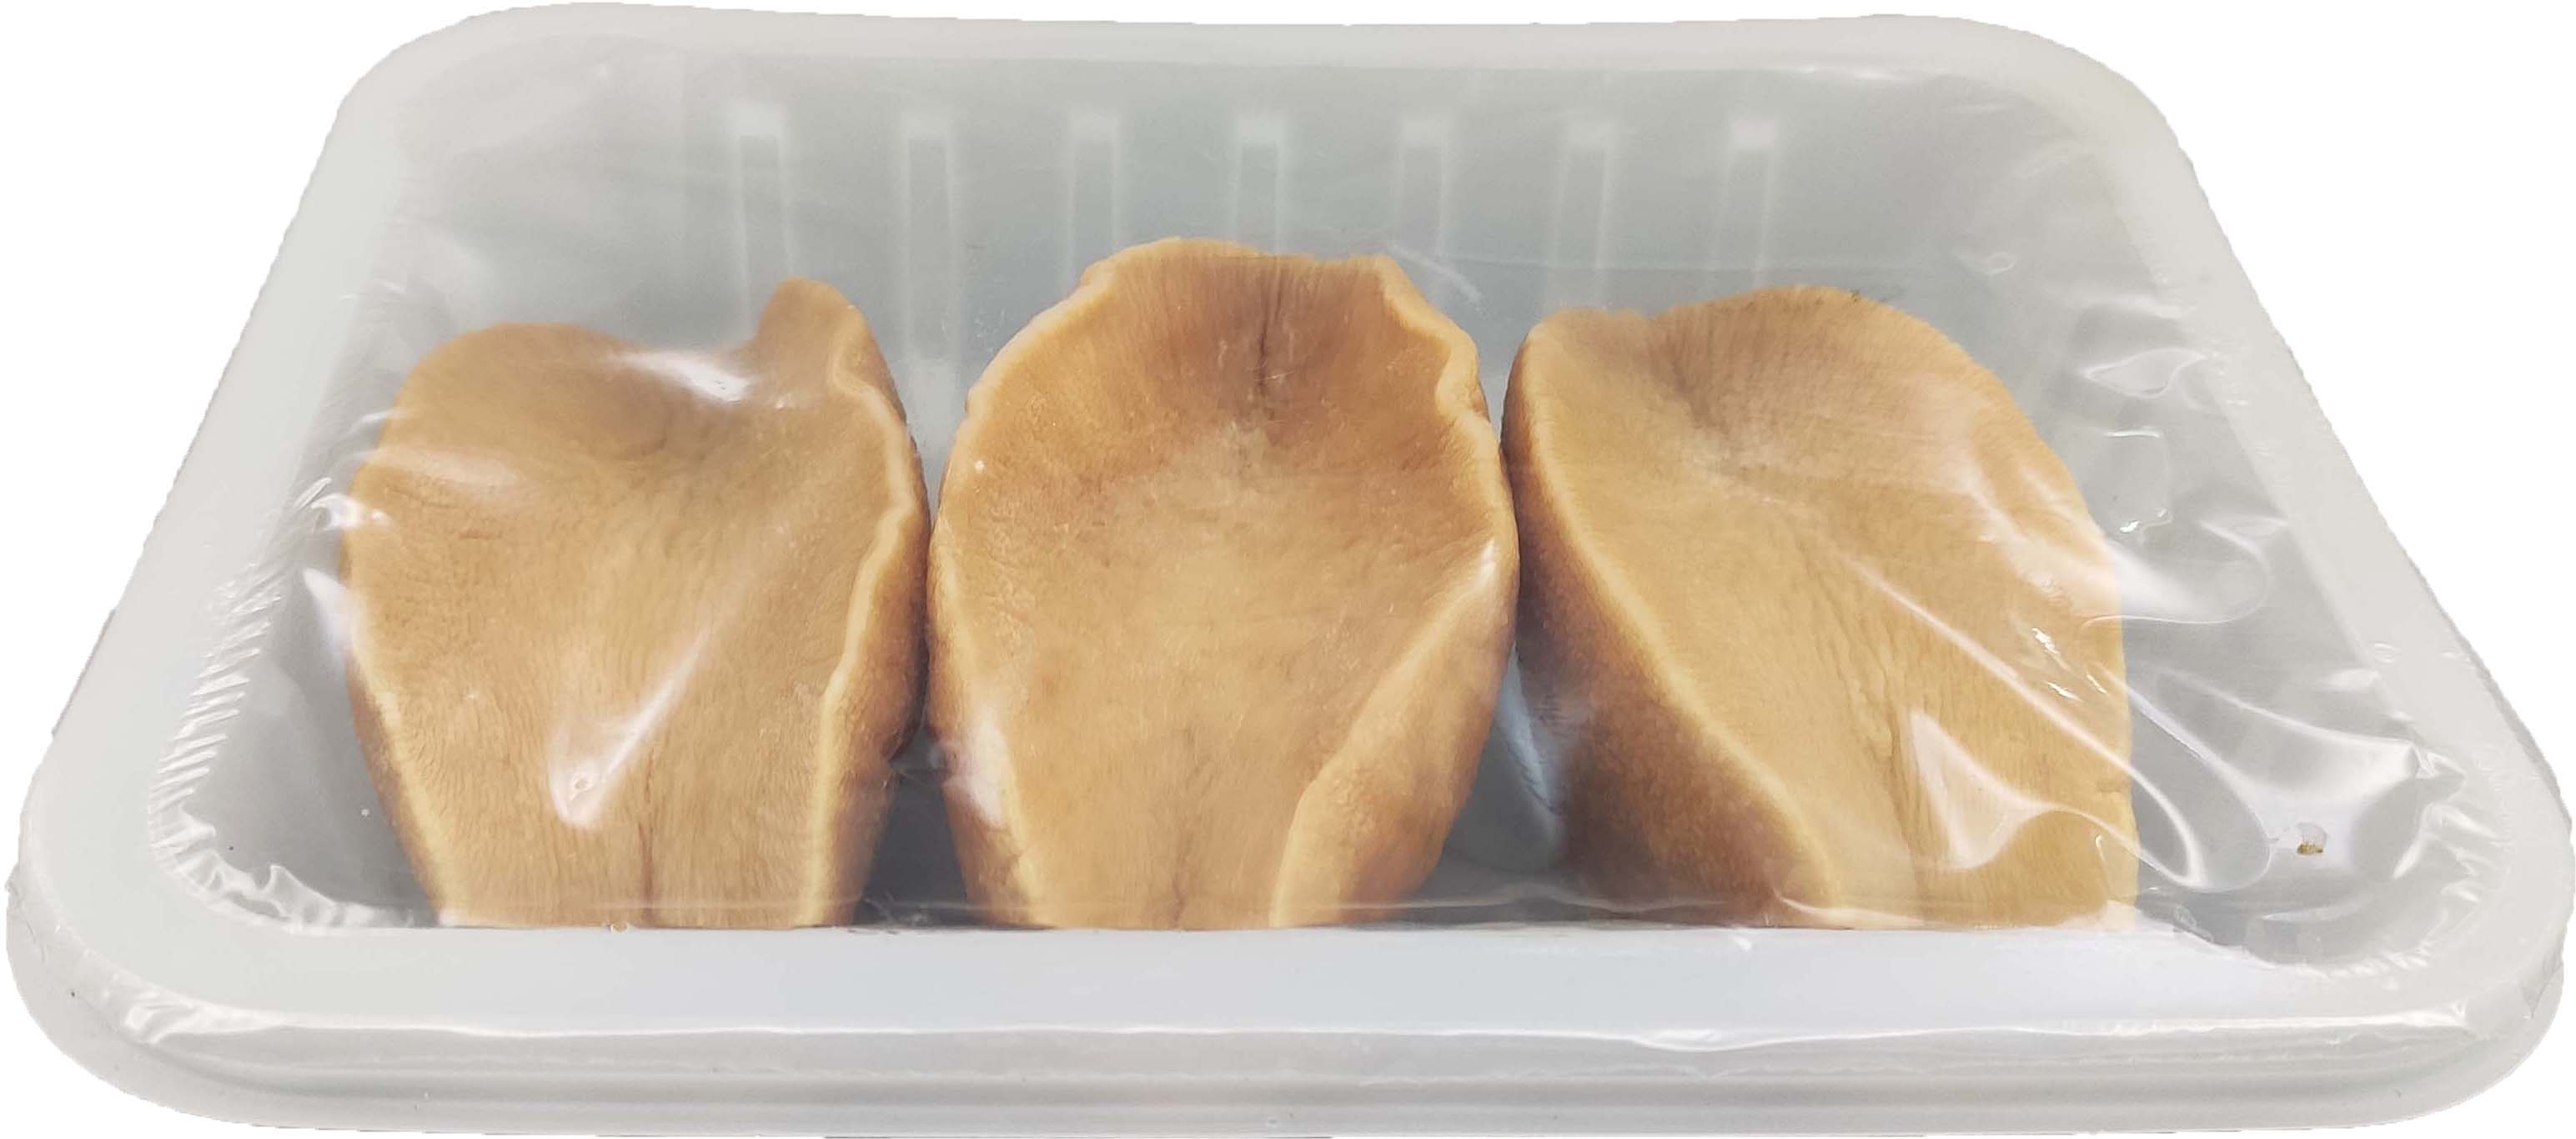 Frozen Gdld Abalone(3 piece)